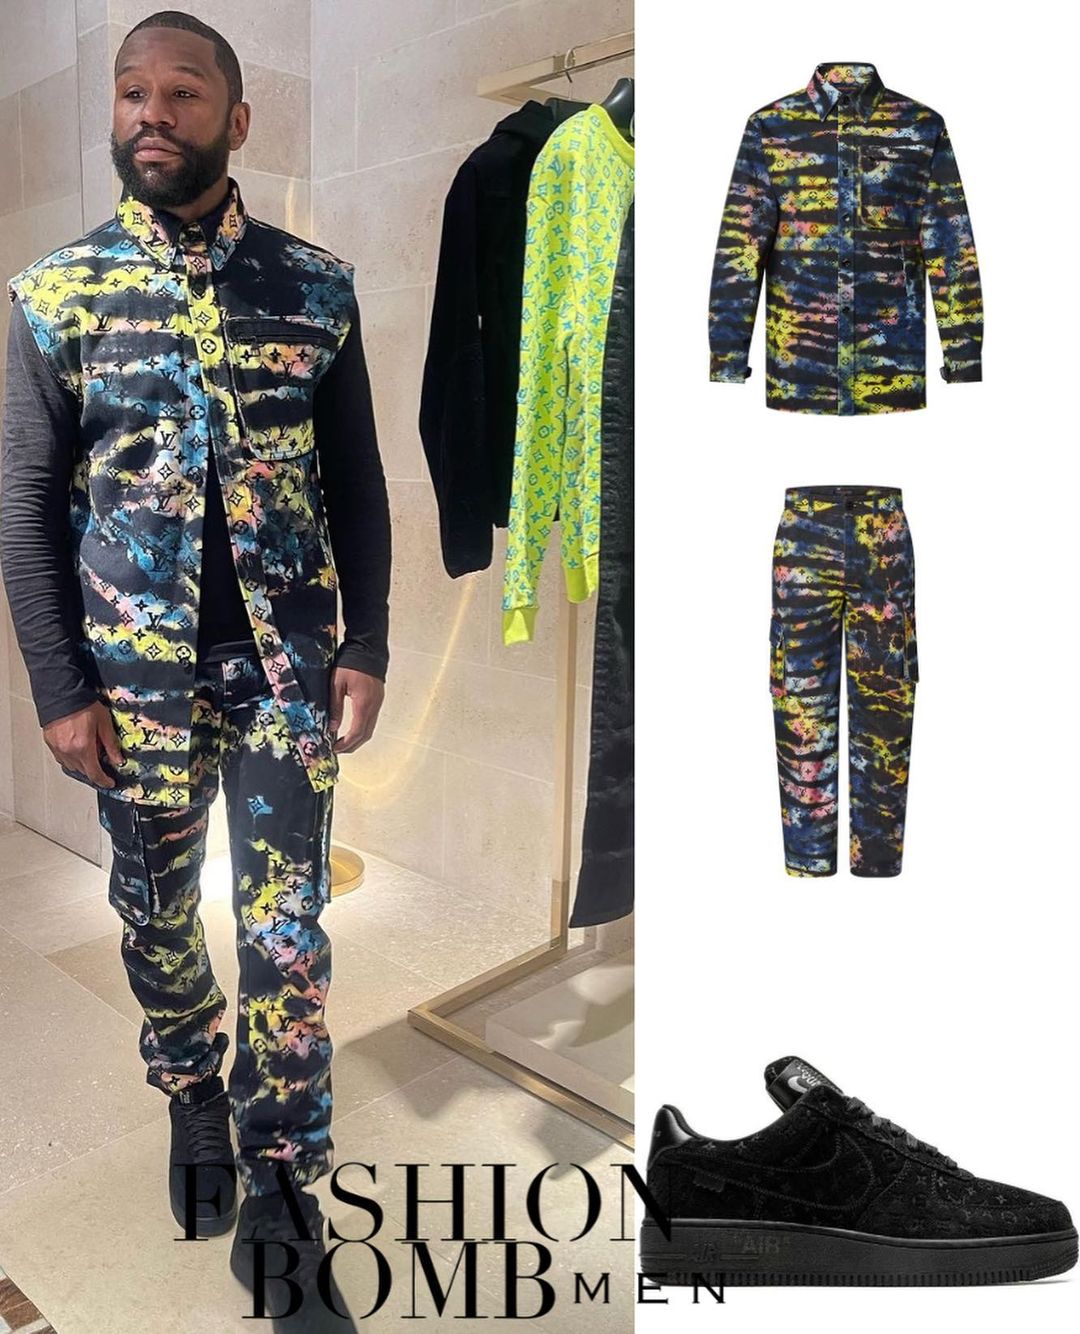 Fashion Bomb Men: Floyd Mayweather Dripped Out in Tie Dye Louis Vuitton –  Fashion Bomb Daily